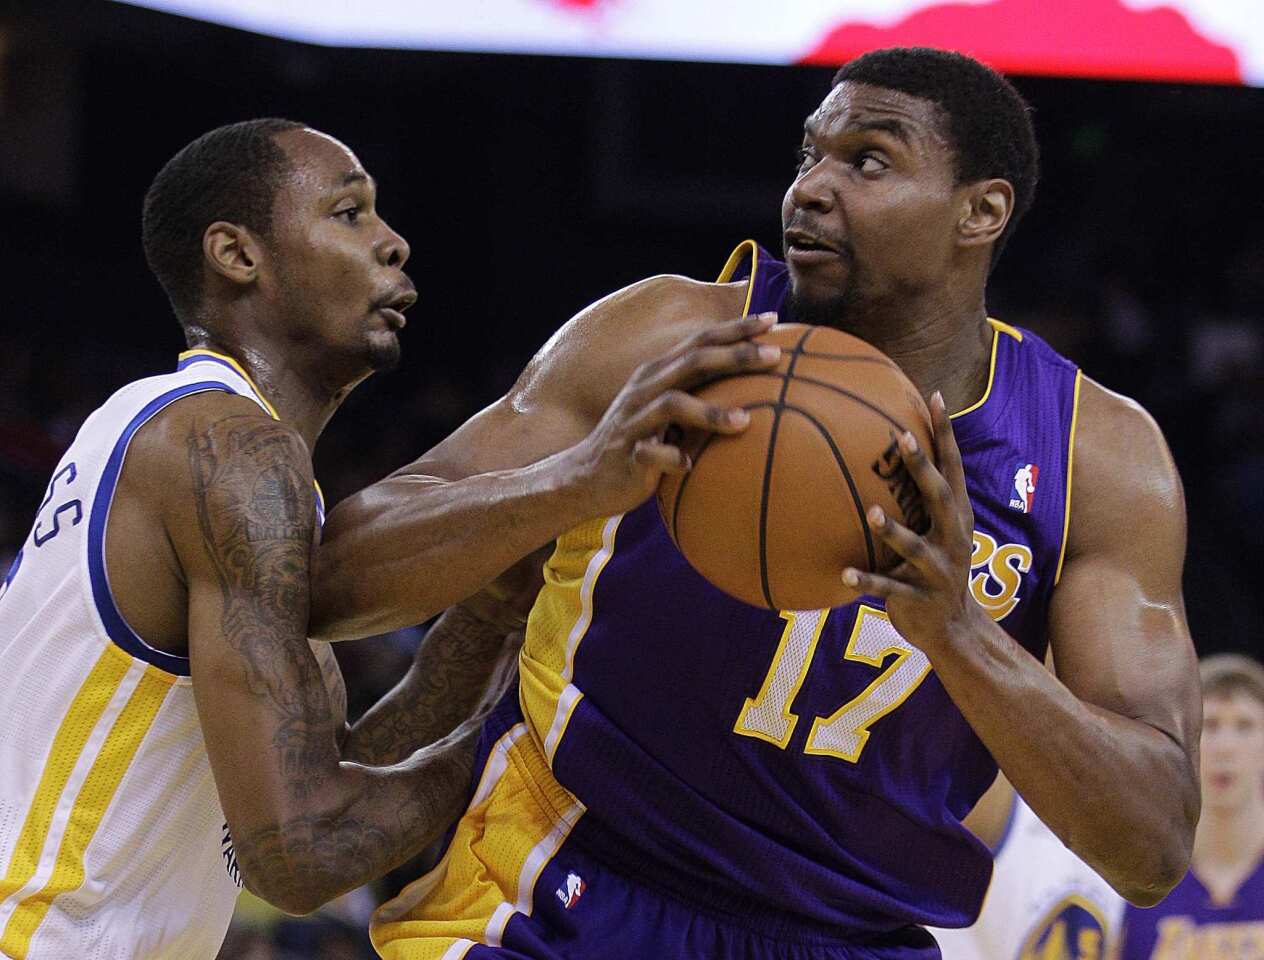 Andrew Bynum, Mickell Gladness